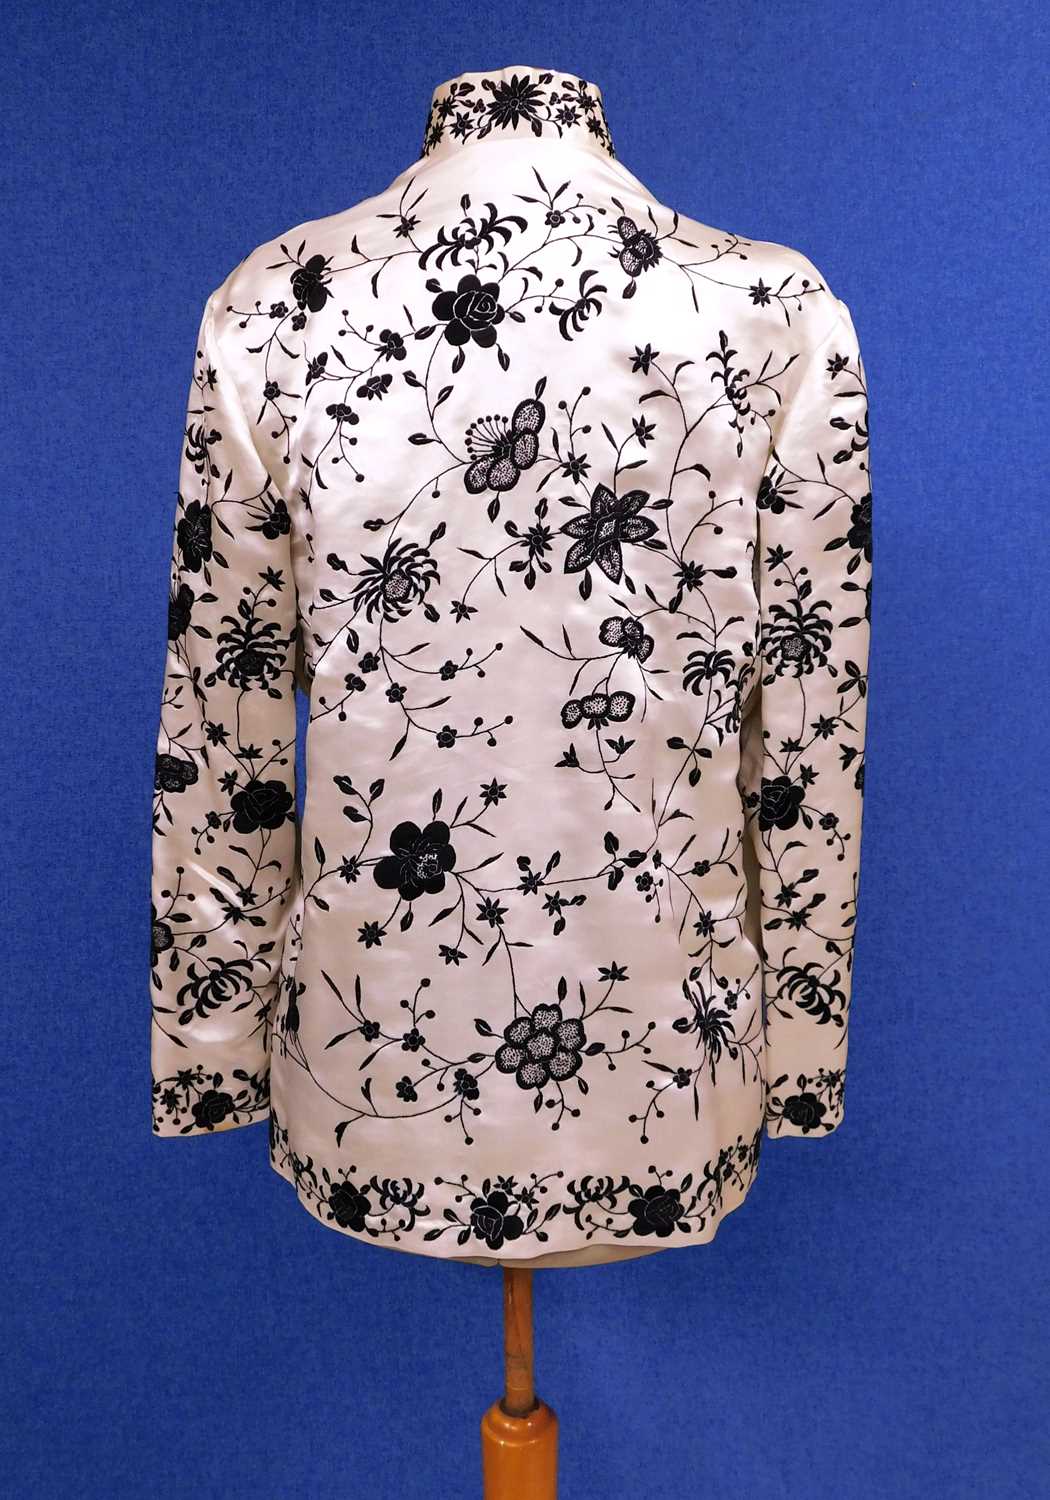 A white satin and black embroidered Chinese jacket by Plum Blossom, with high collar, long sleeves - Image 4 of 6